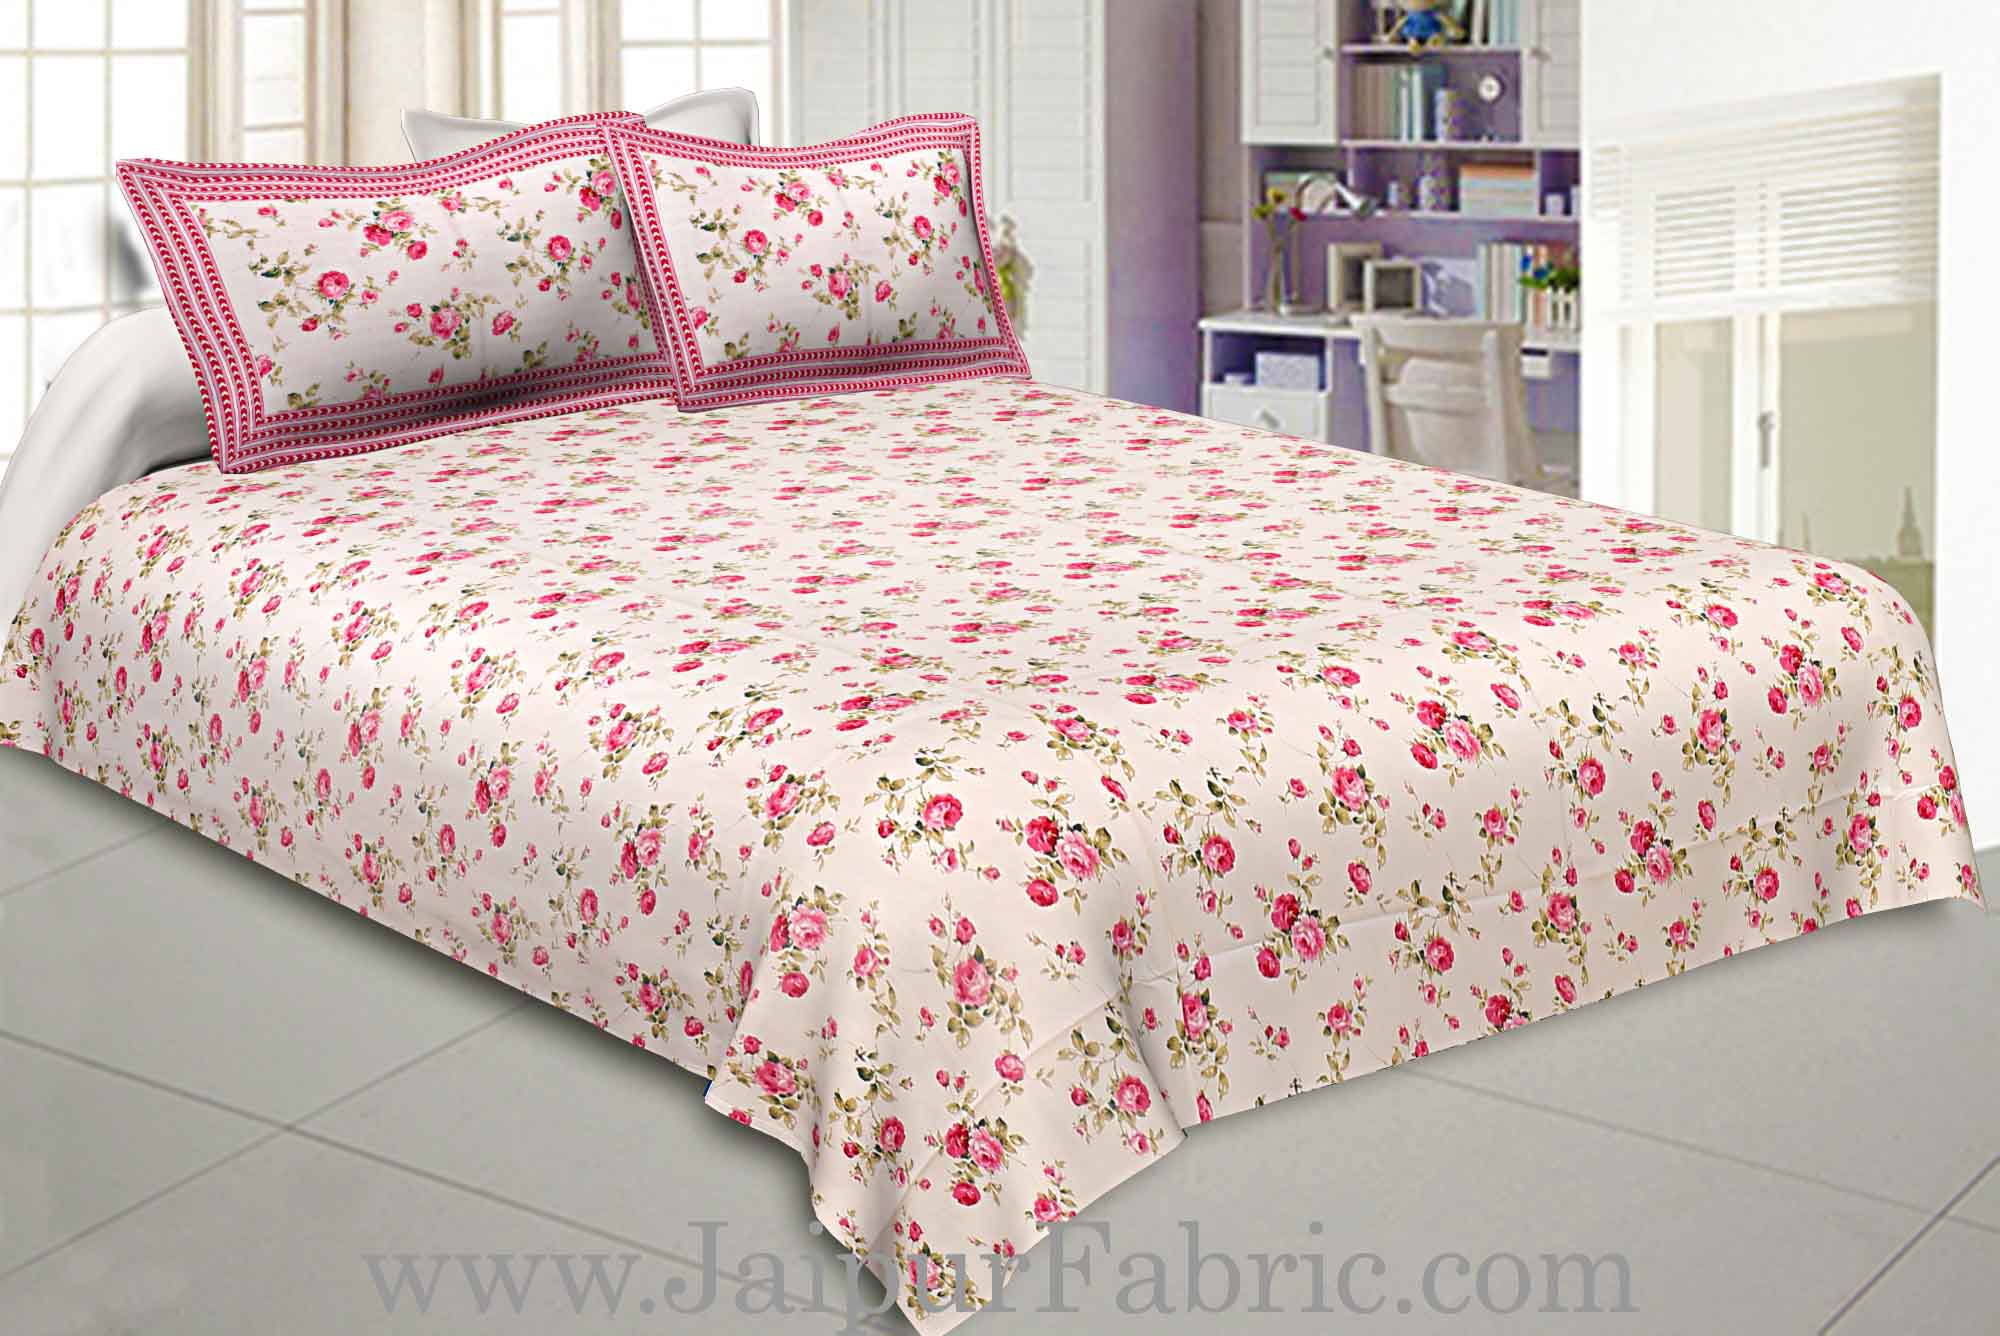 COMBO96- Set of 1 Double Bedsheet and  1 Single Bedsheet With  2+2 Pillow Cover